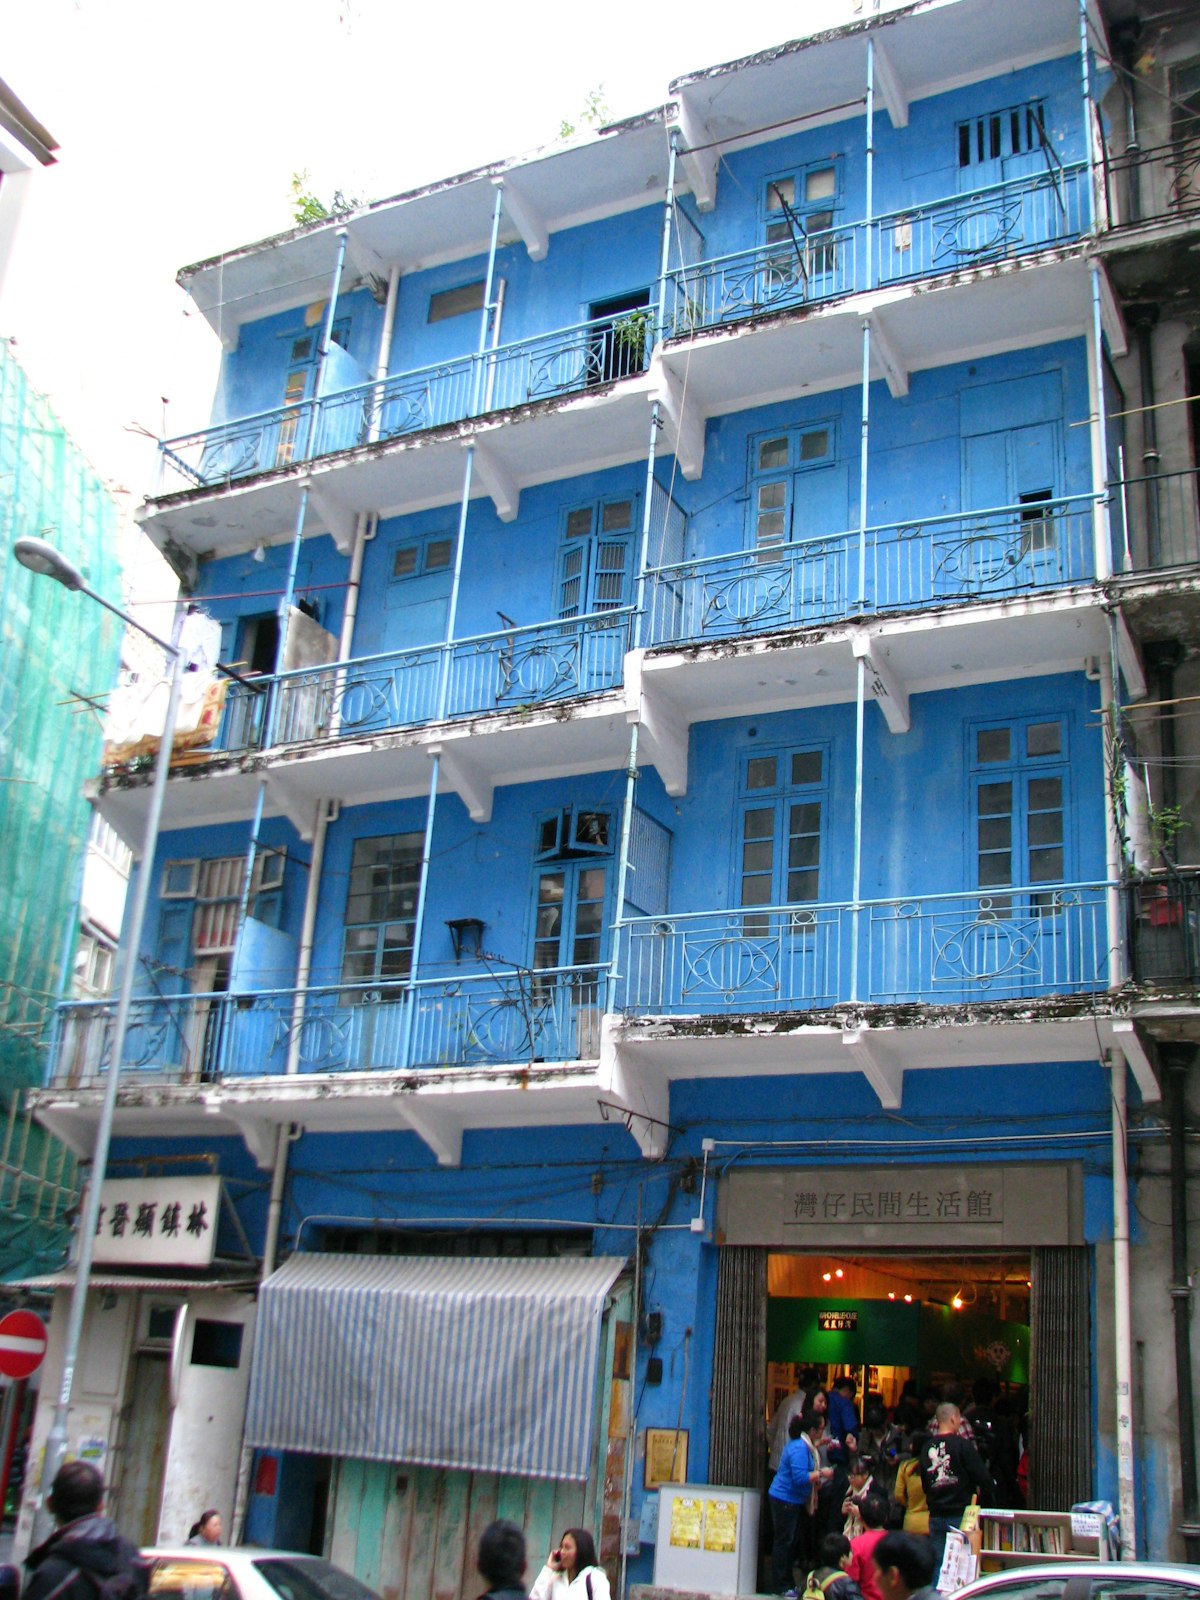 [UNVERIFIED CONTENT] Wan Chai traditional looking Blue House in Hong Kong...In this photo, an exhibit of the Hong Kong tram is being hosted to celebrate its 100th anniversary.